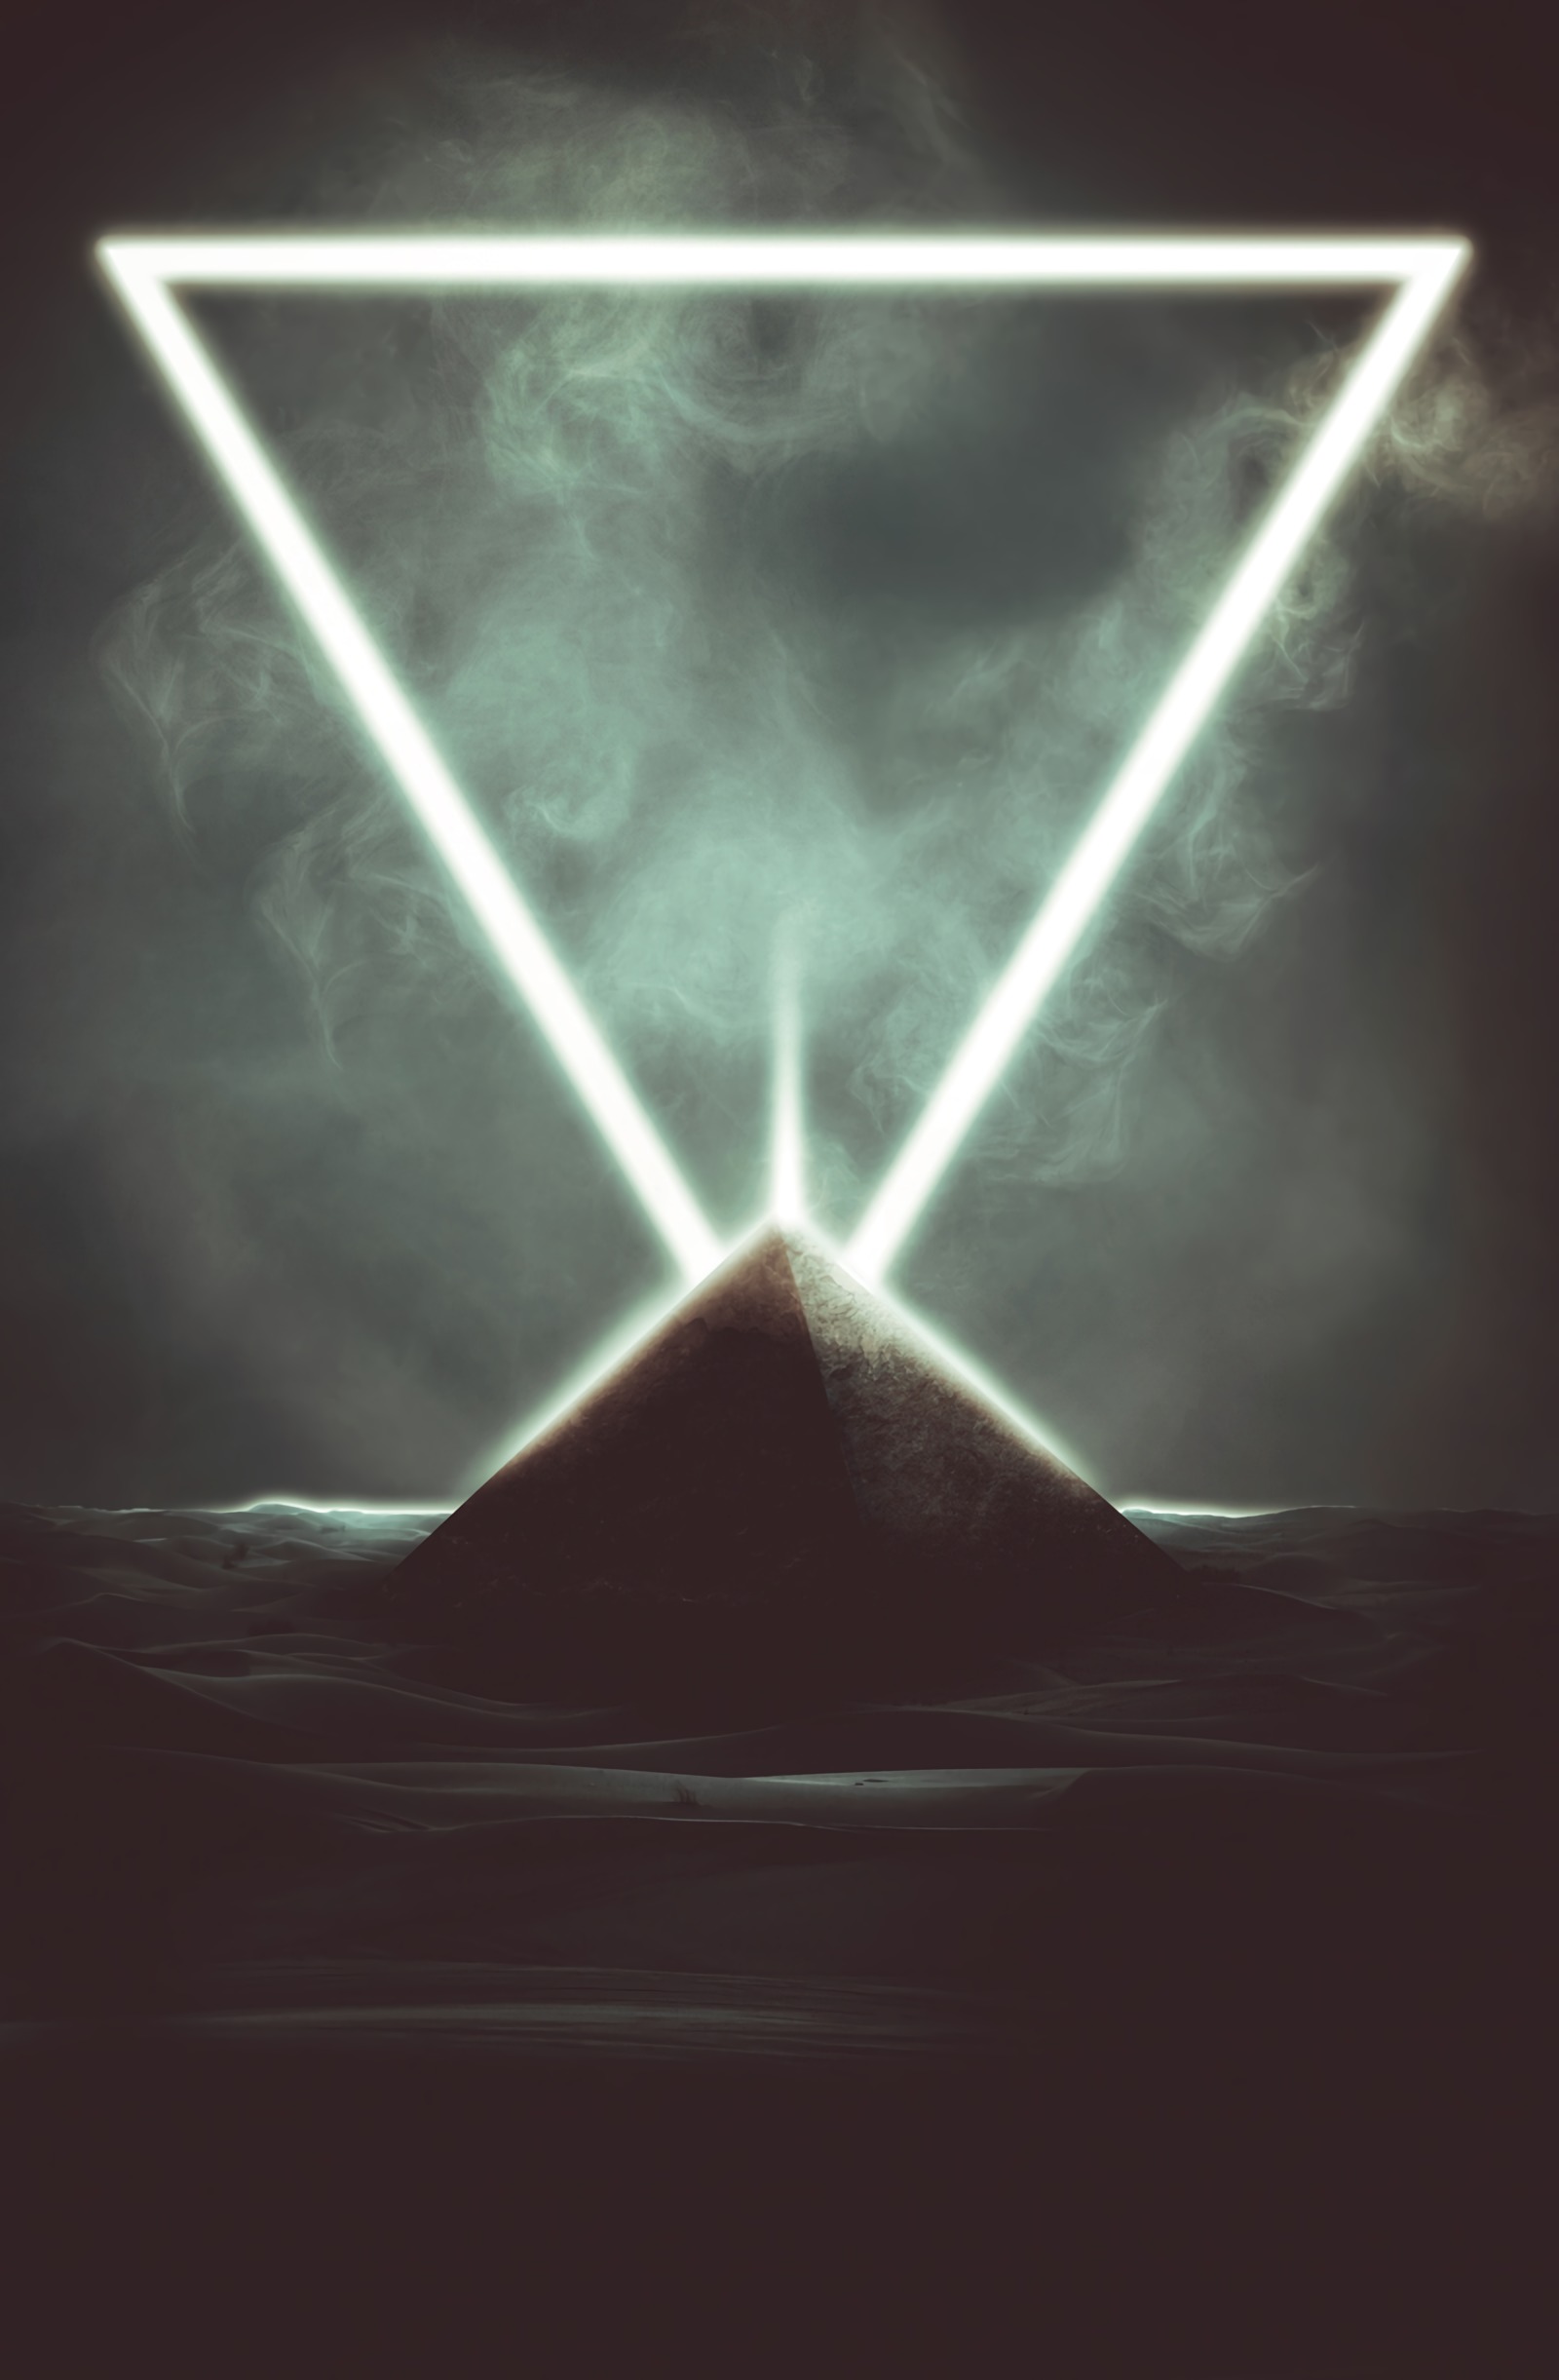 120991 download wallpaper art, smoke, dark, glow, triangle, pyramid screensavers and pictures for free